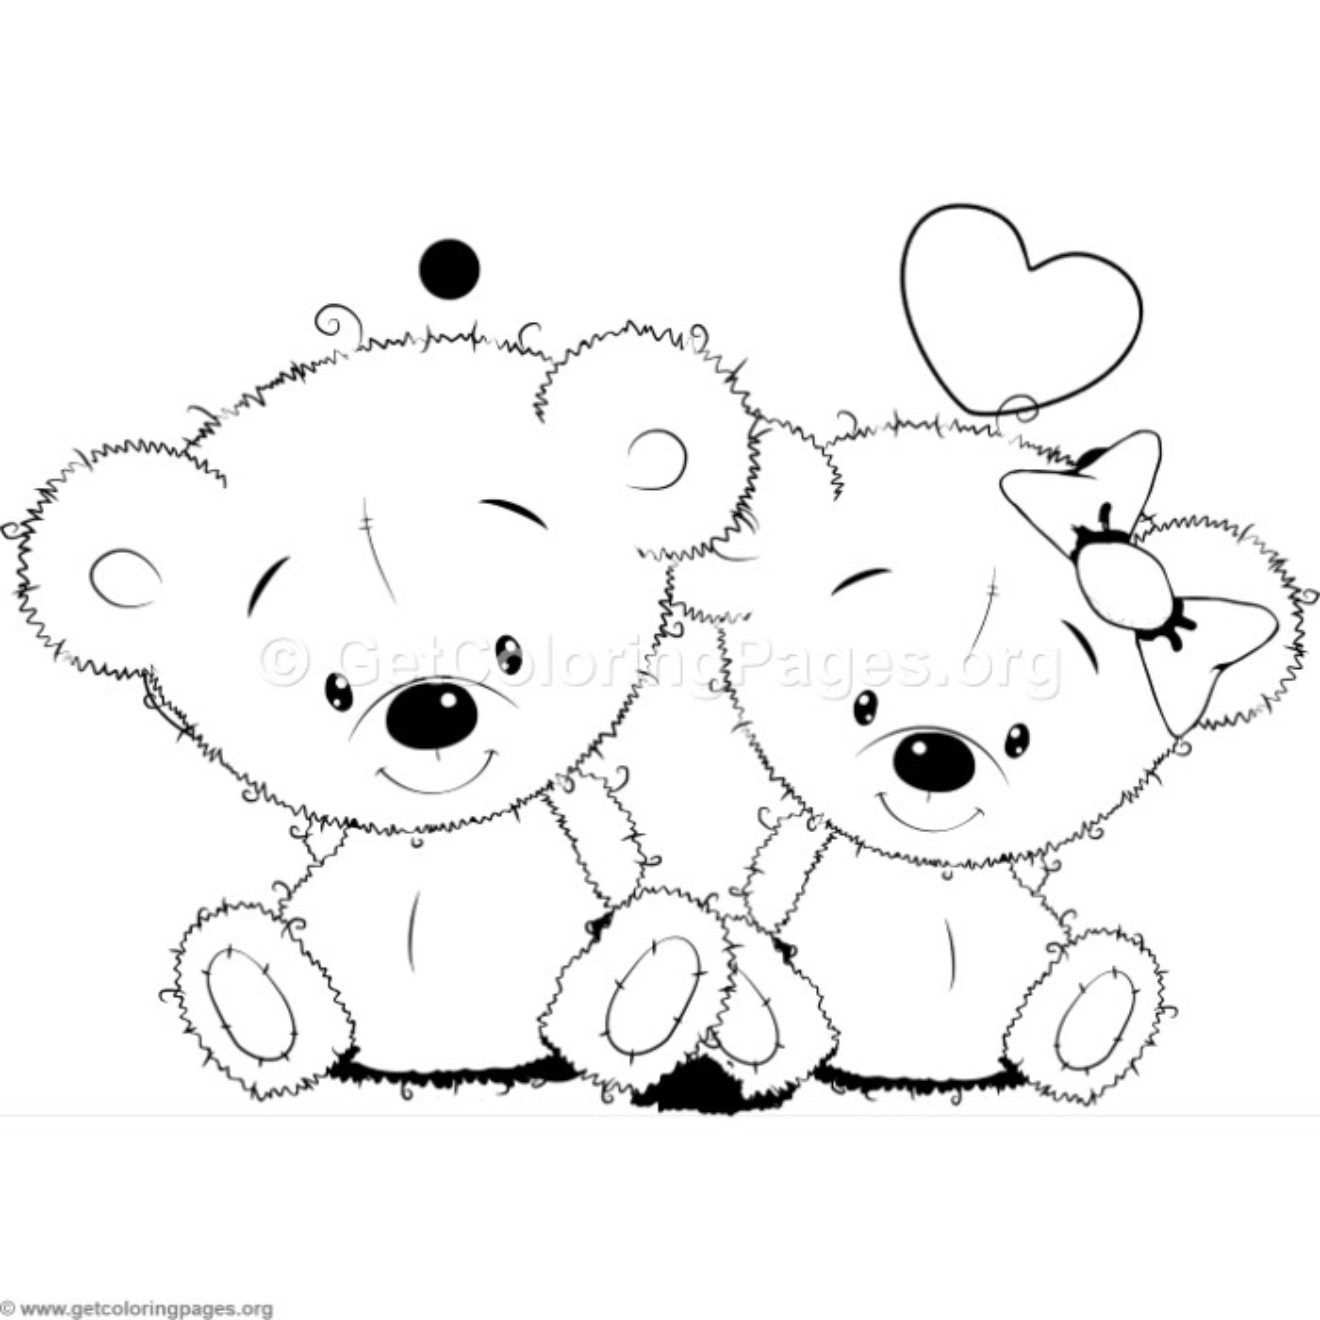 Cartoon Coloring Sheets Page 6 Getcoloringpages Org Met